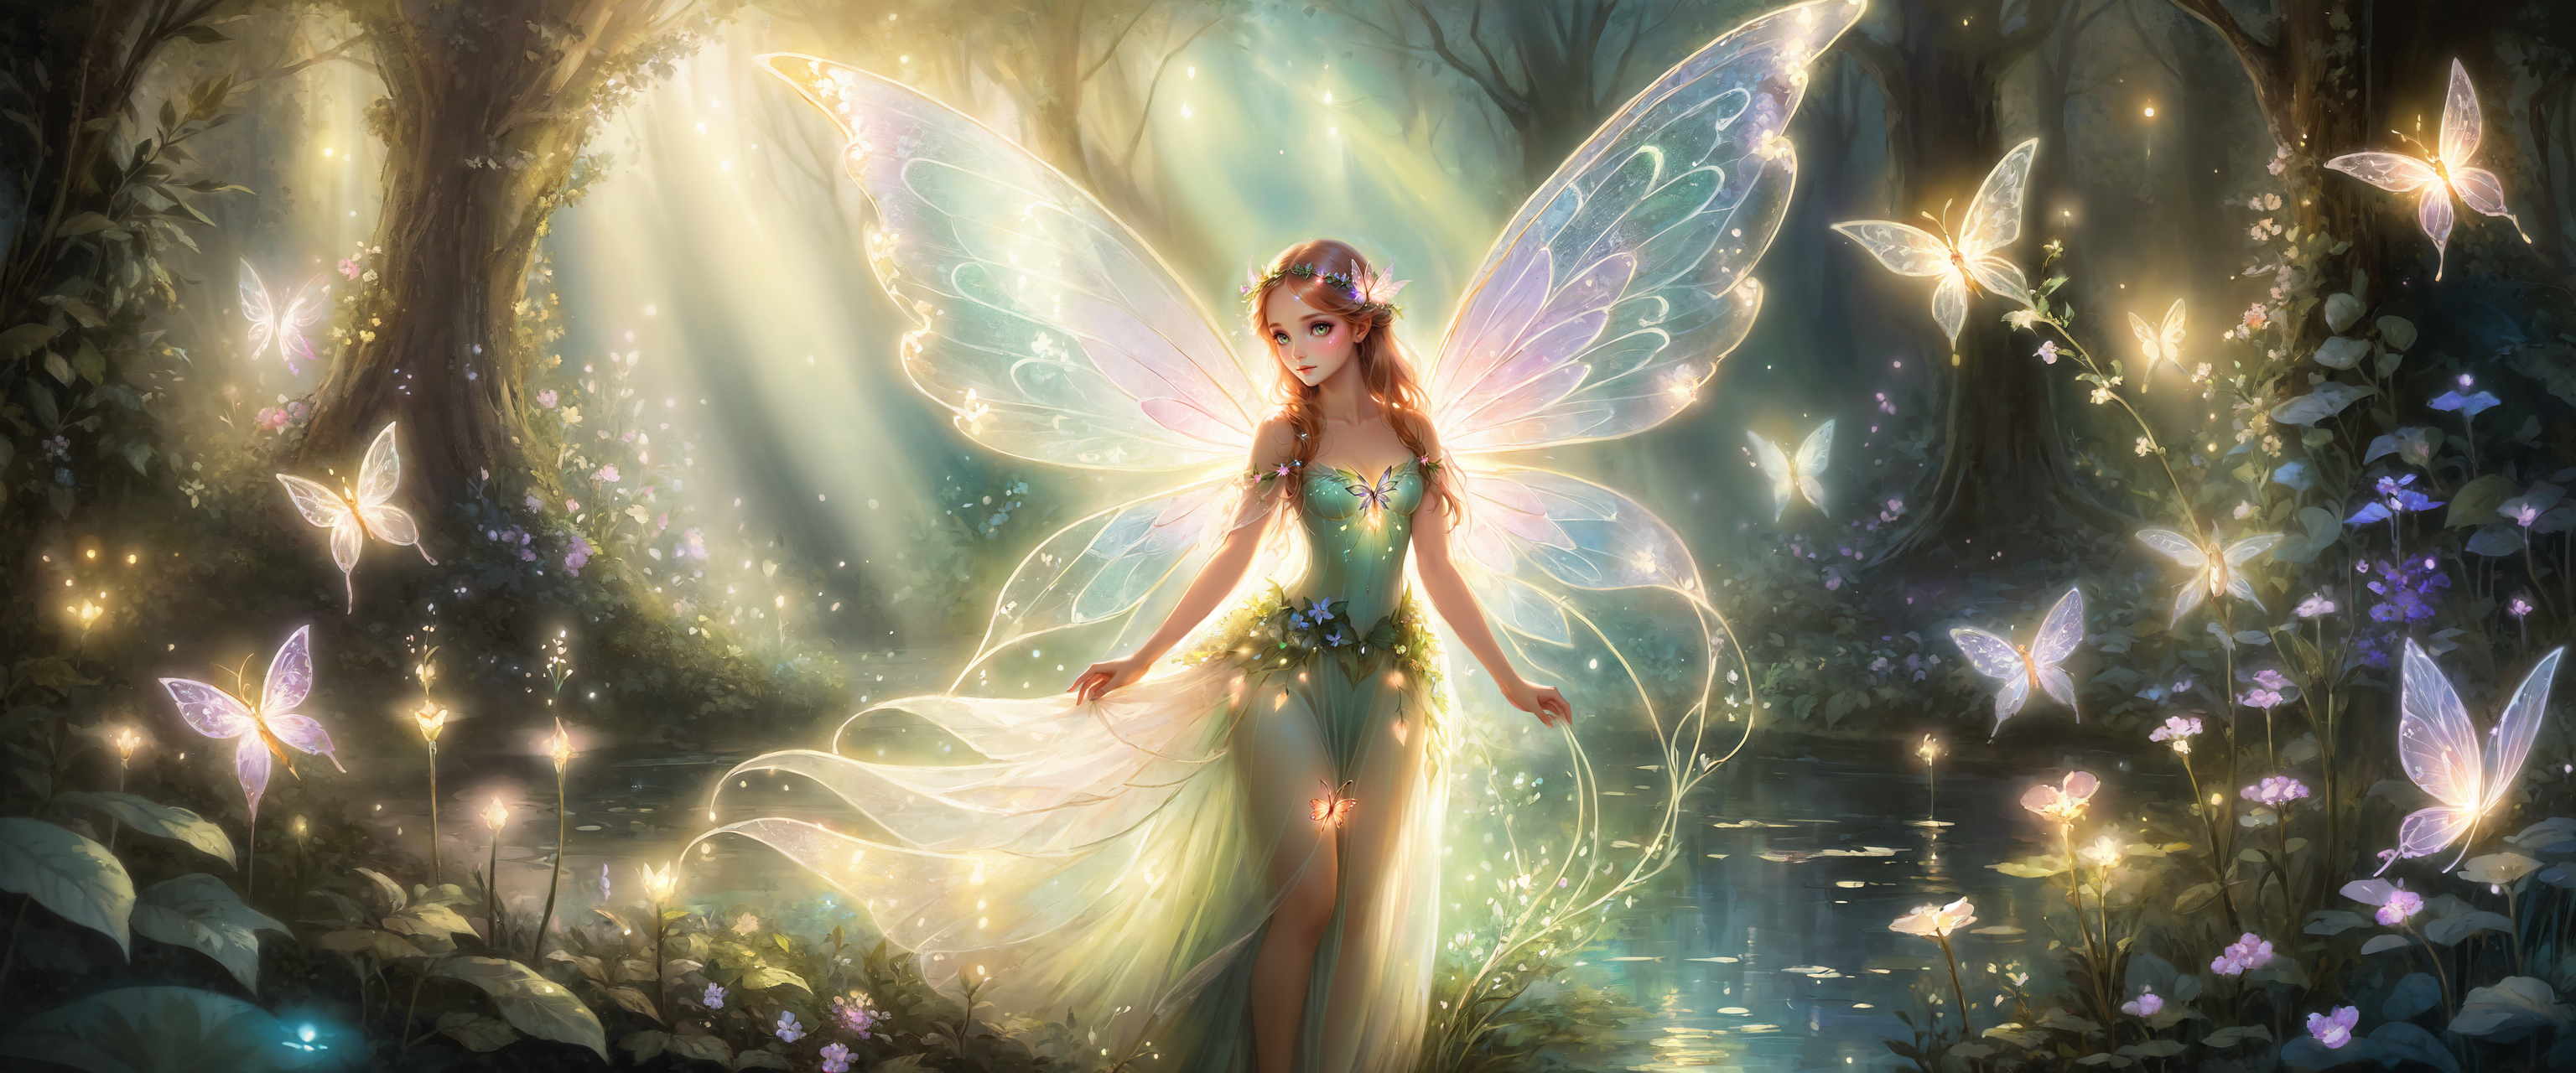 Fairy Gone V2-1 by NoAvalons on DeviantArt